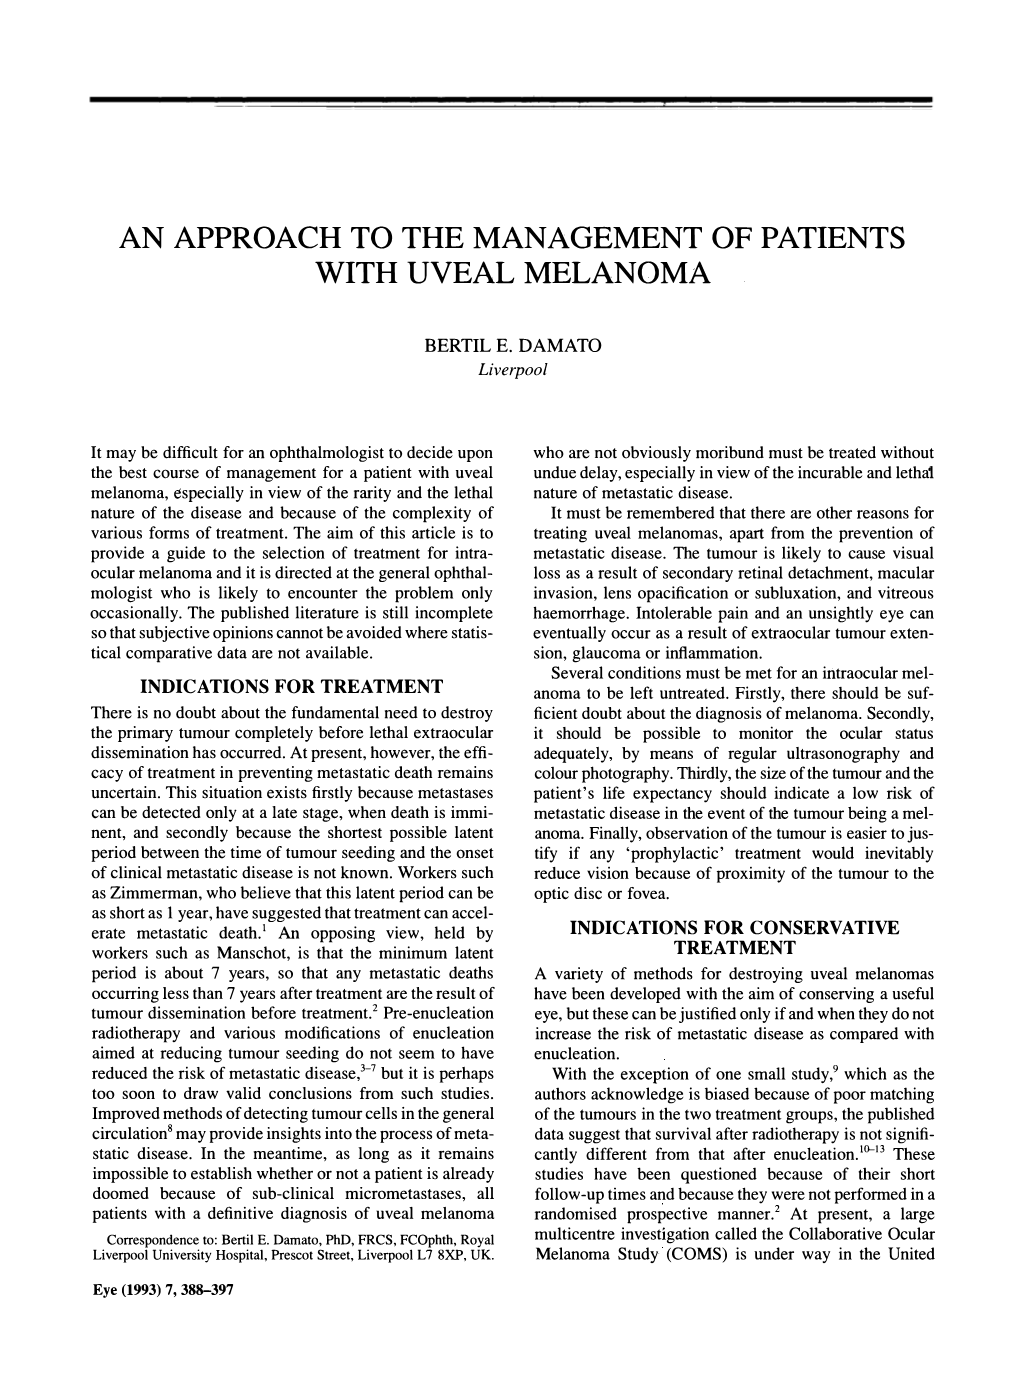 An Approach to the Management of Patients with Uveal Melanoma